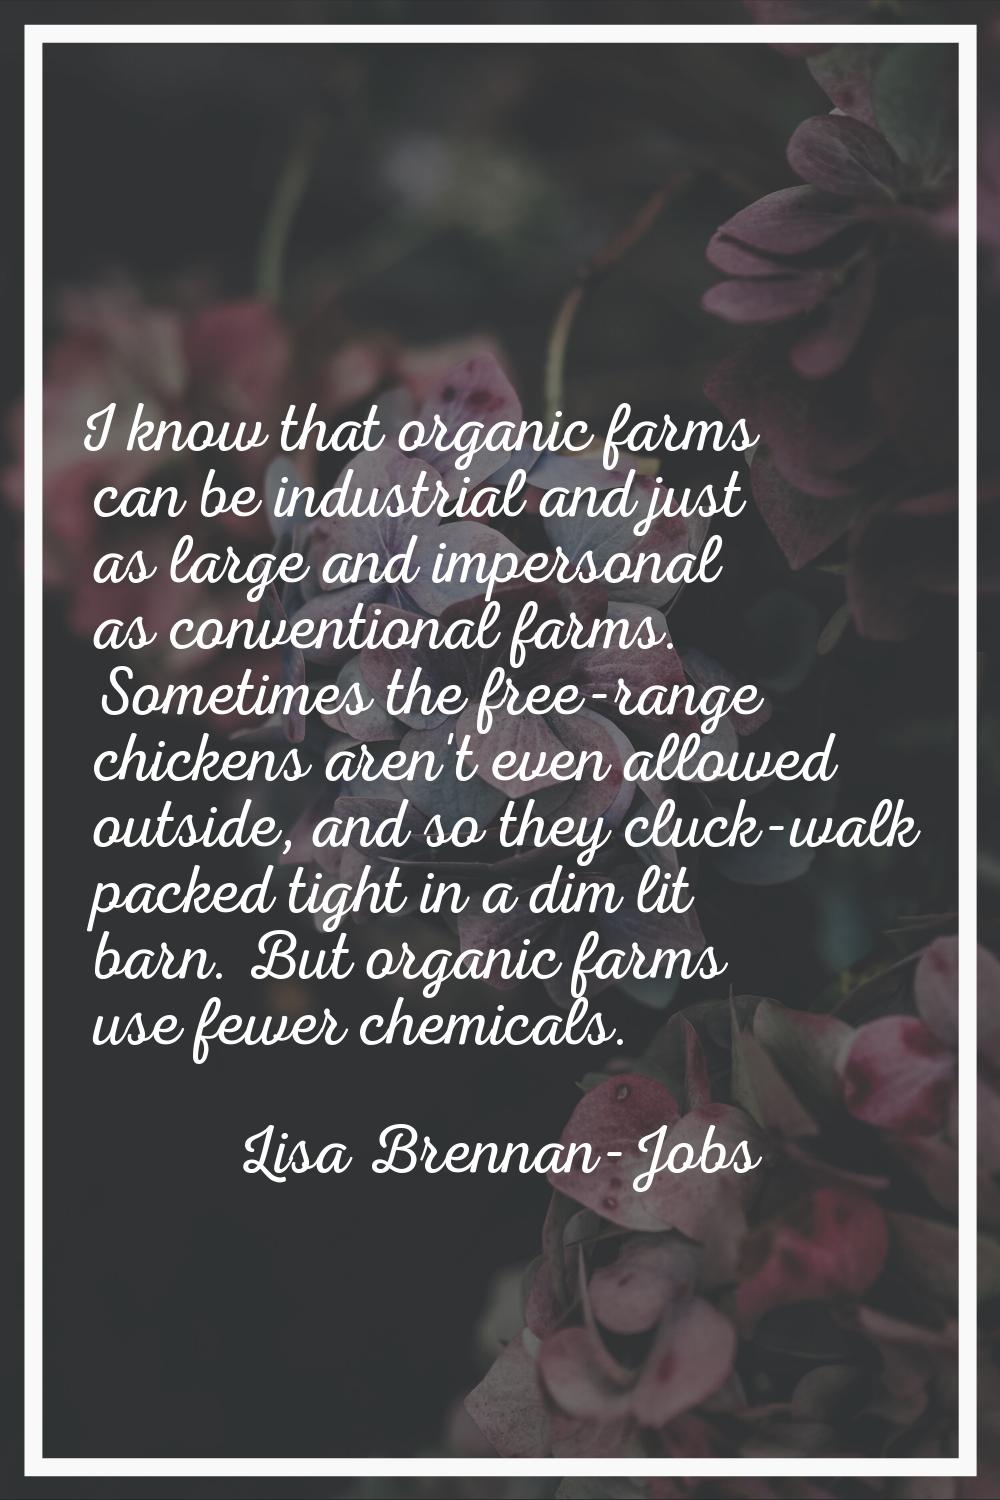 I know that organic farms can be industrial and just as large and impersonal as conventional farms.